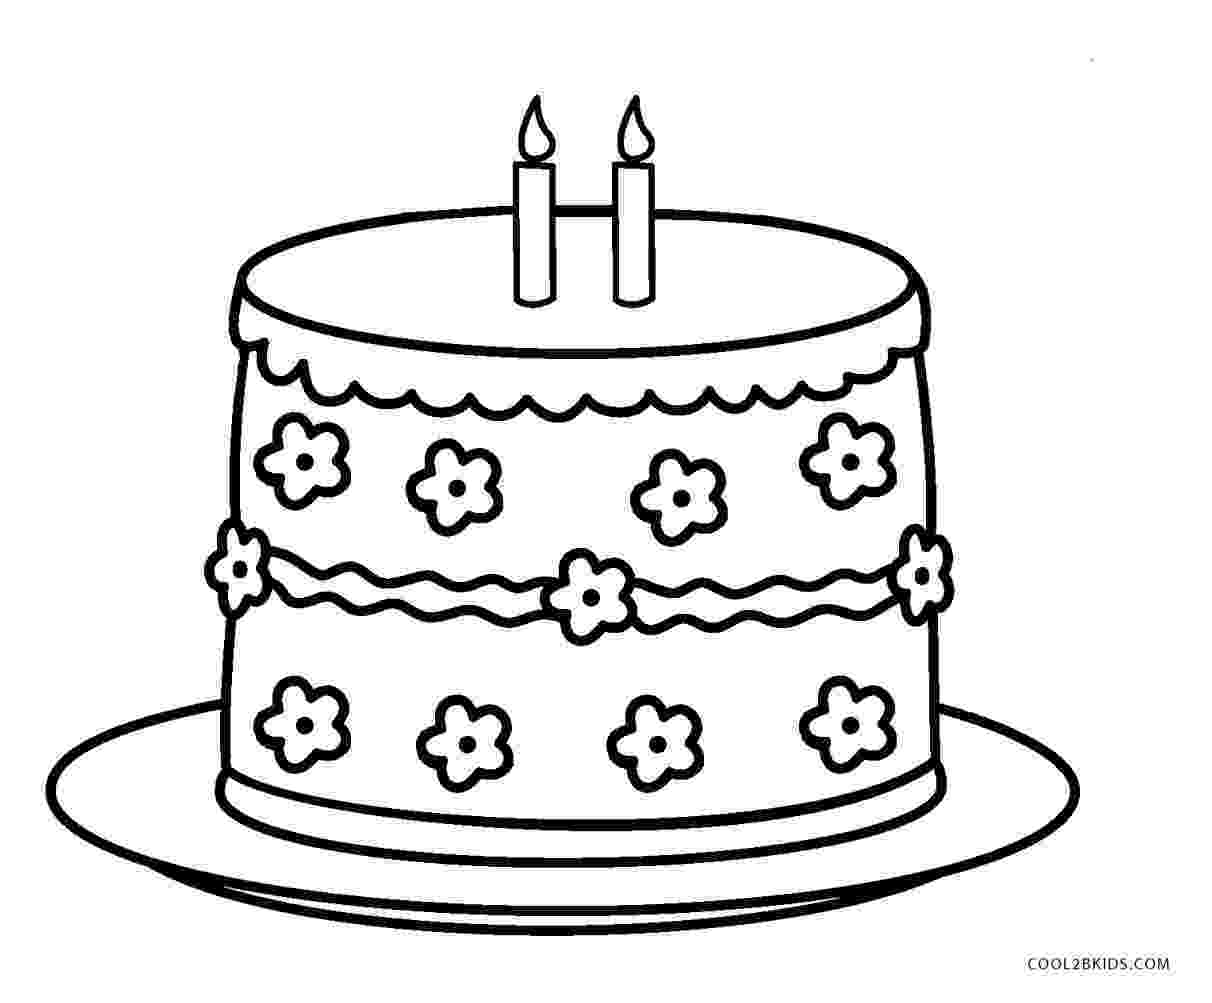 coloring pages cake strawberry cake coloring pages best place to color cake coloring pages 